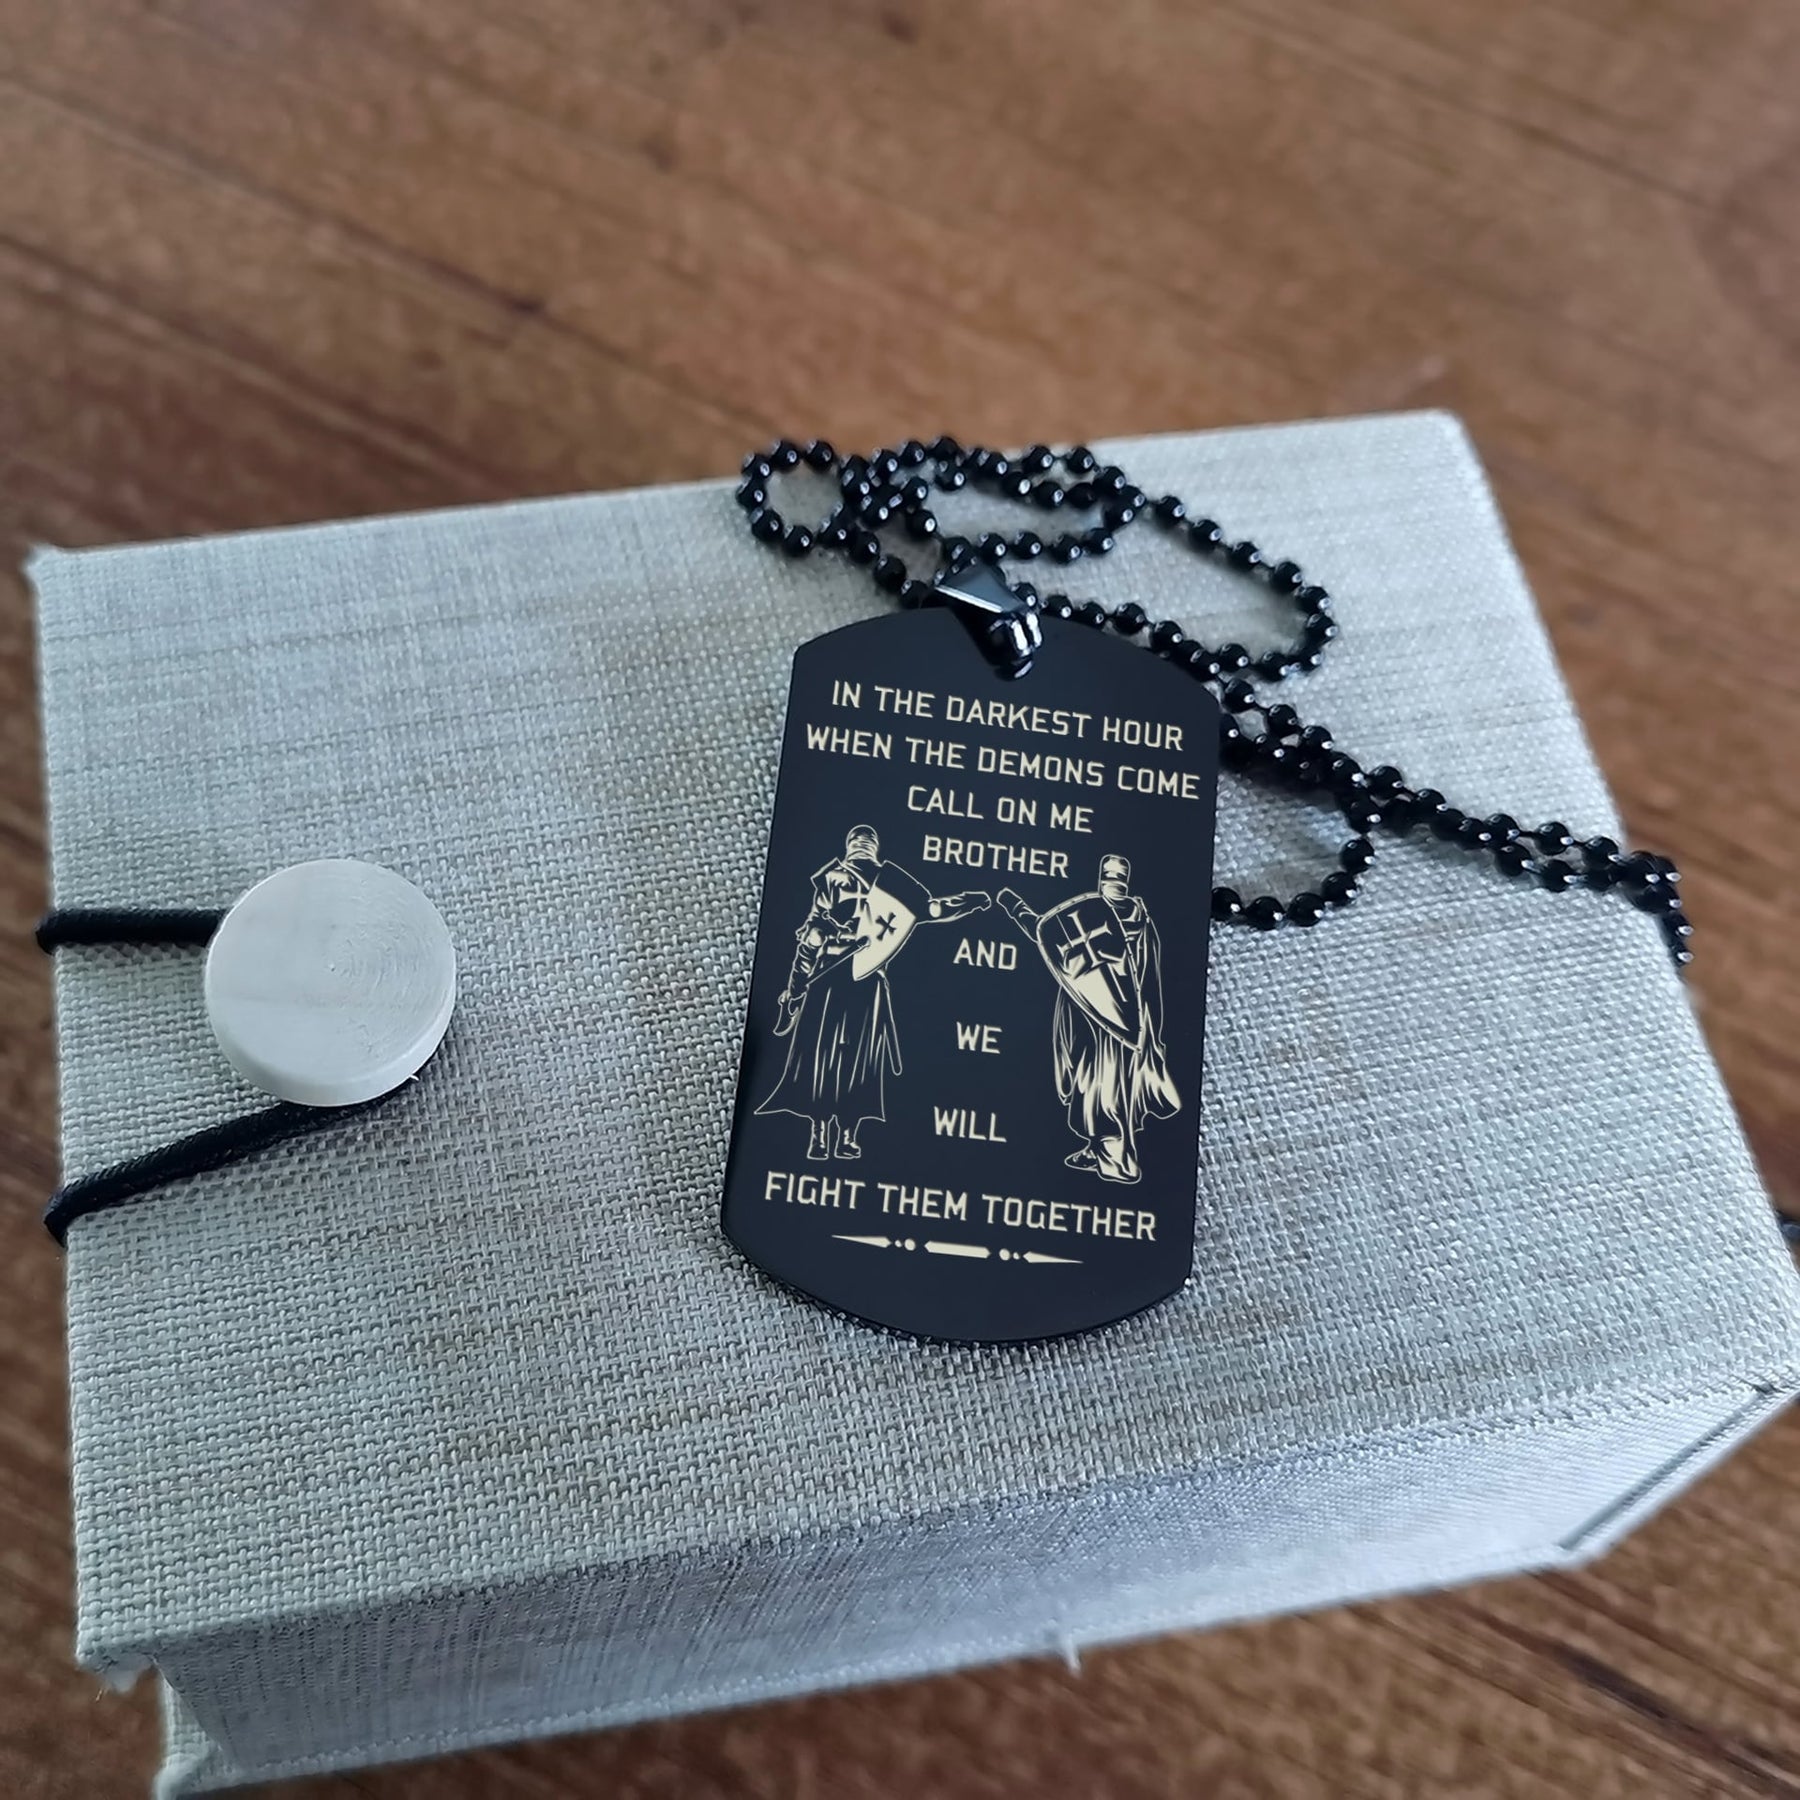 KTD007 - Call On Me Brother - English - Knight Templar  - Engrave Black Dogtag